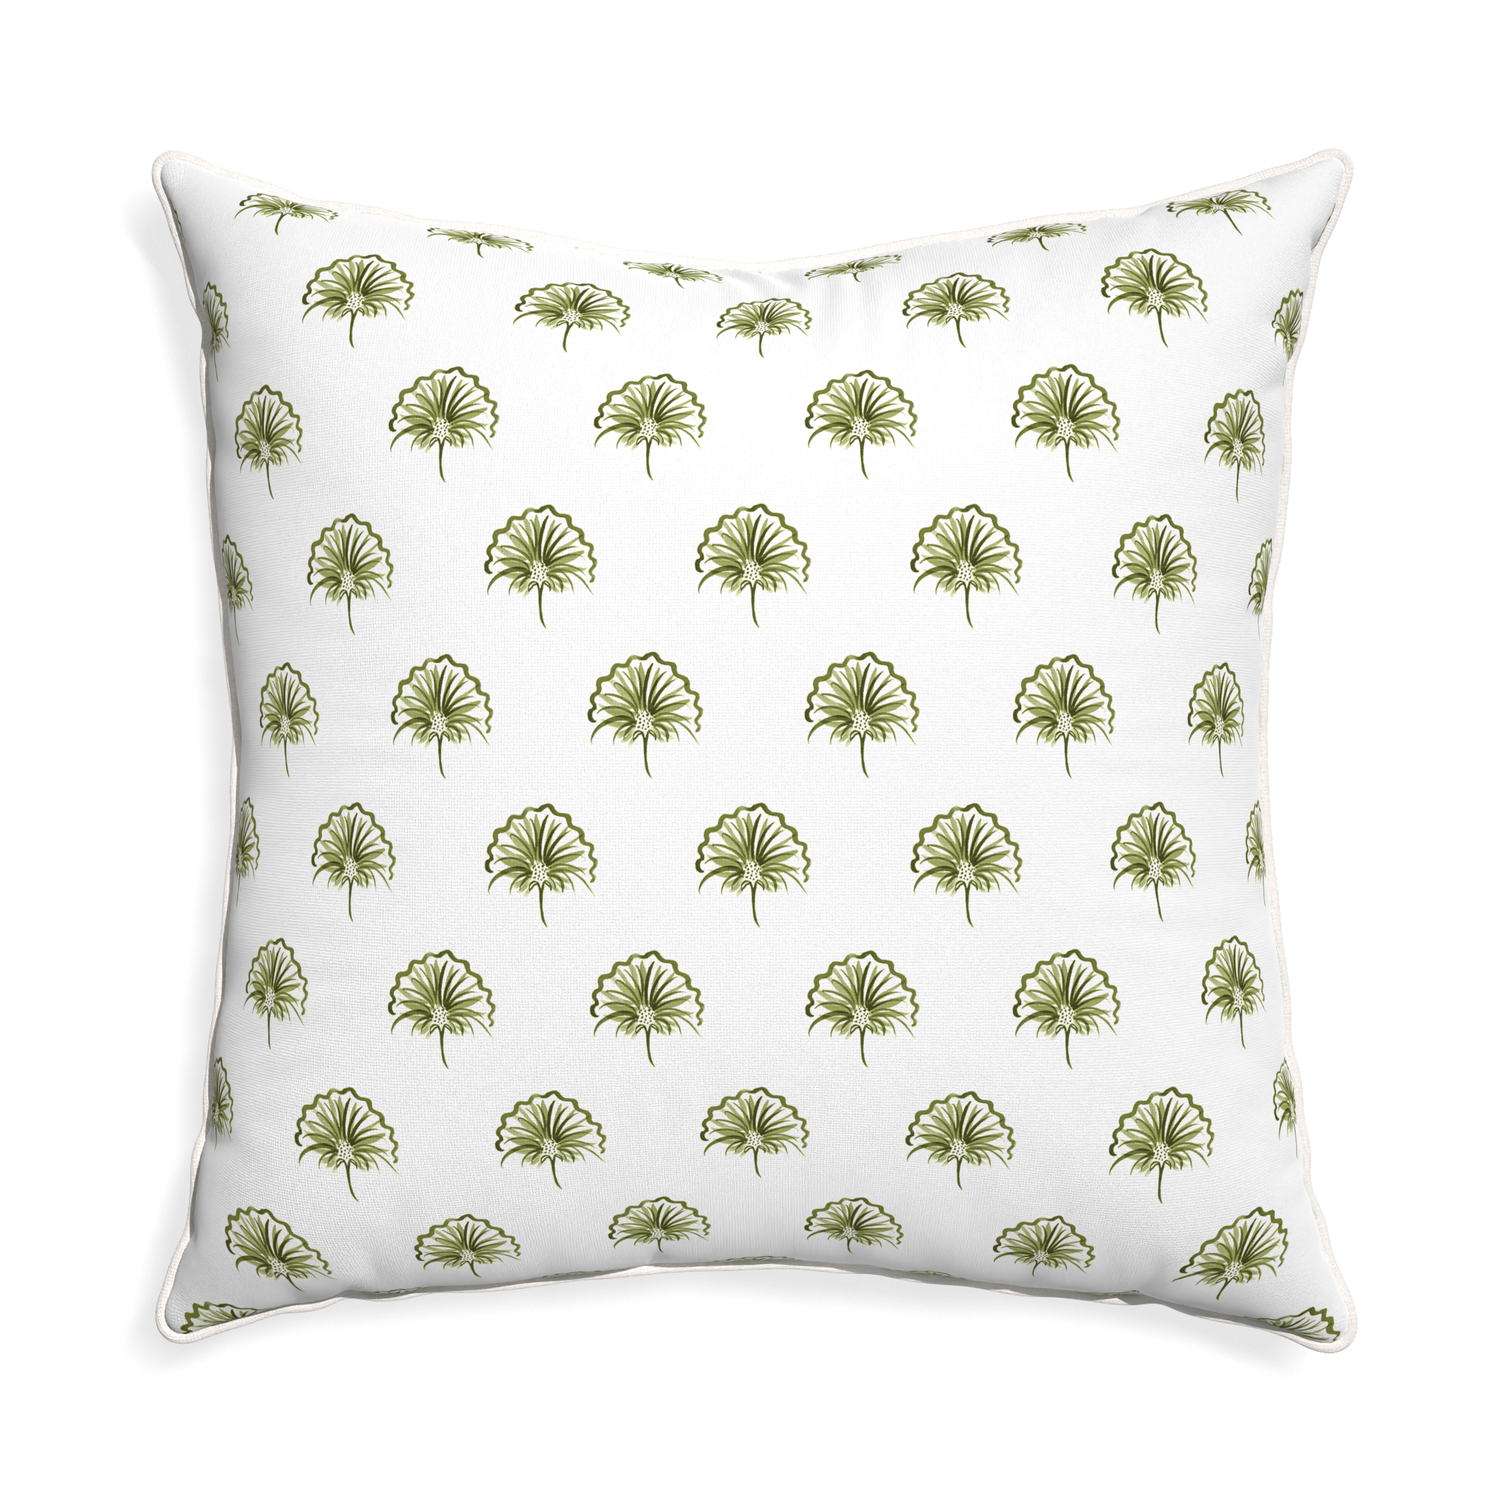 Euro-sham penelope moss custom green floralpillow with snow piping on white background